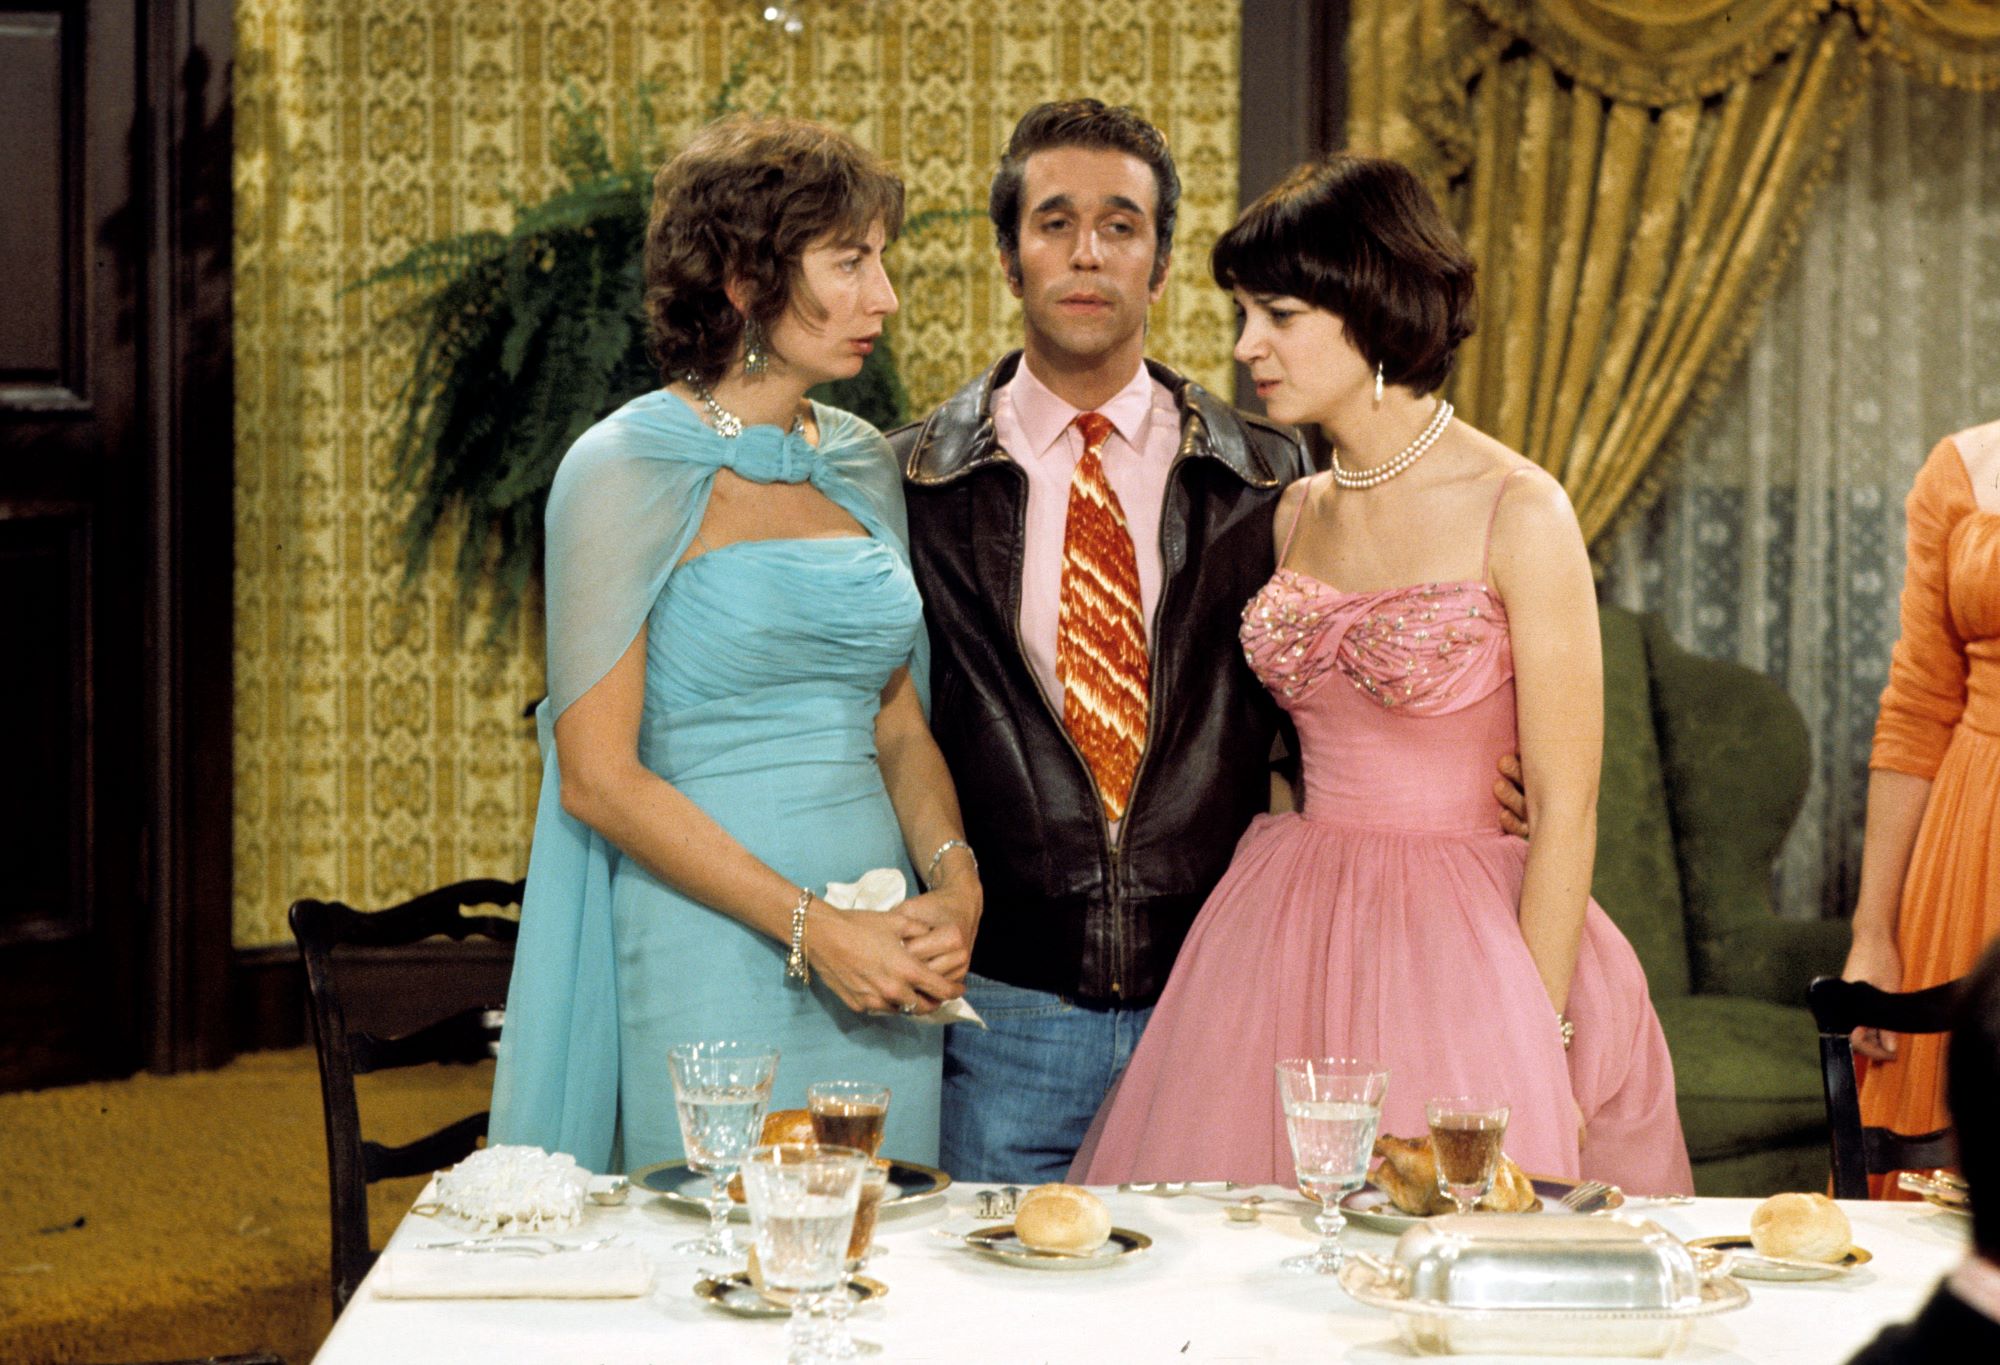 Penny Marshall, Henry Winkler, and Cindy Williams